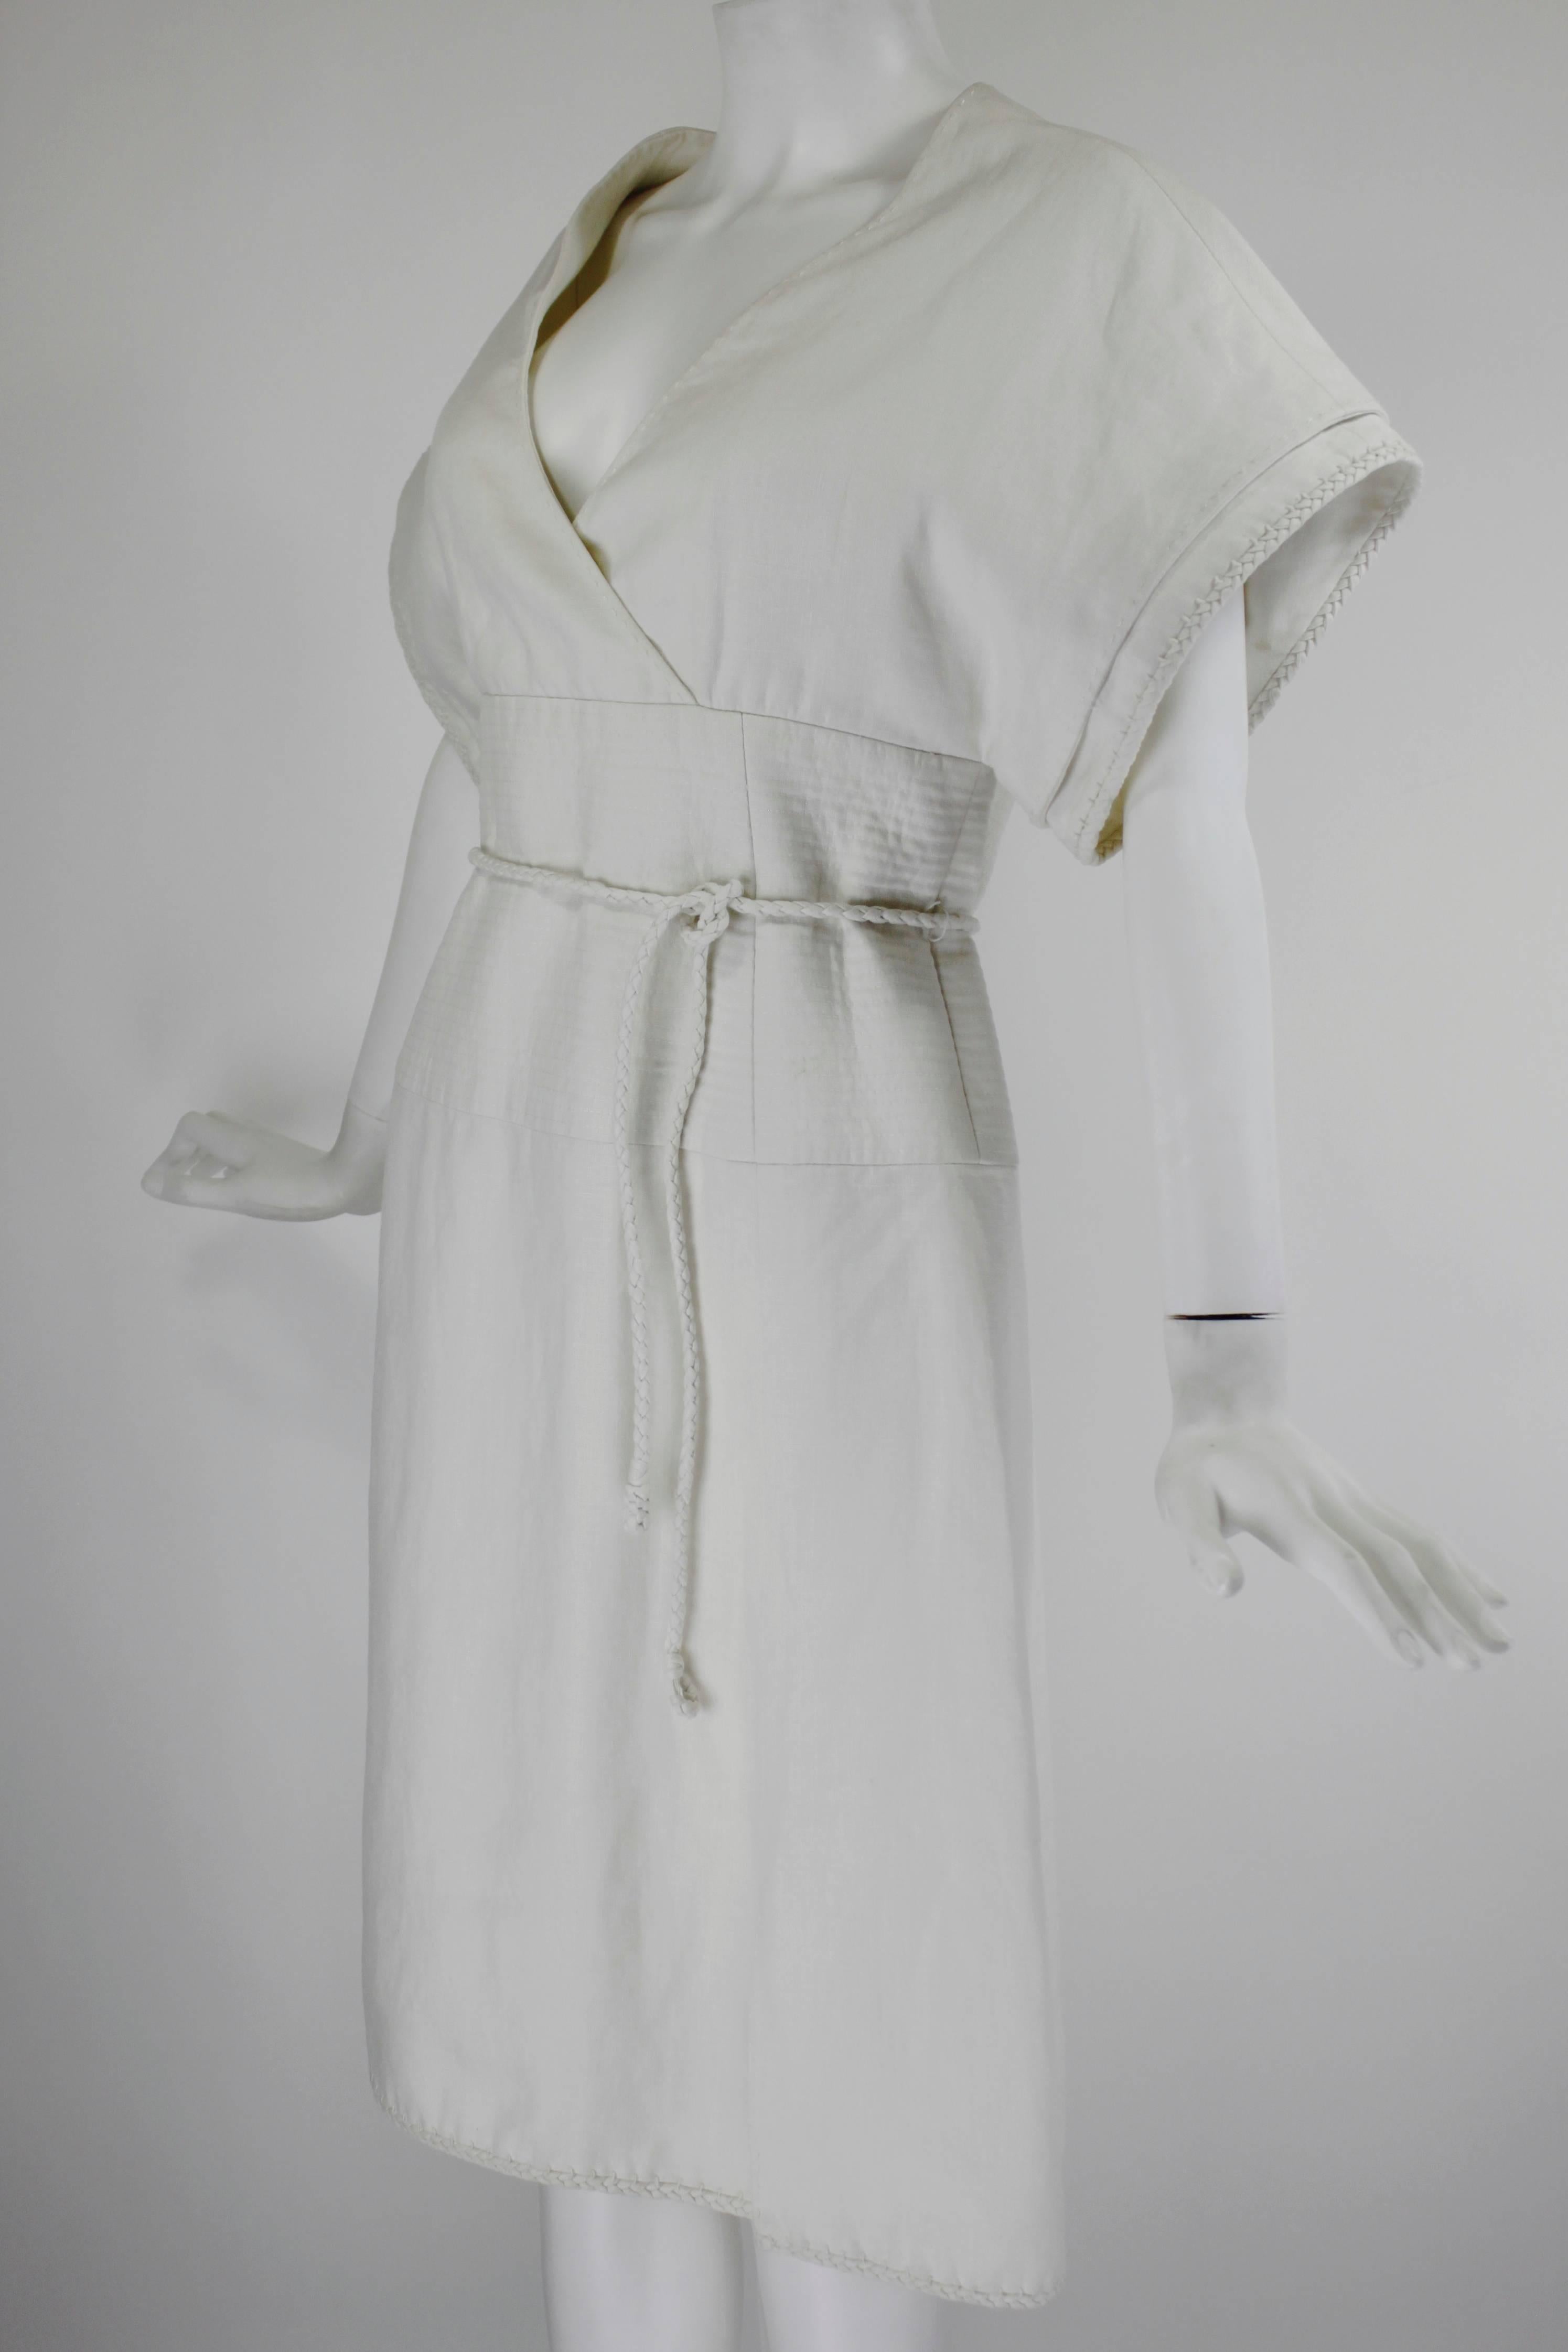 A beautifully tailored minimalist dress from master dressmaker Ralph Rucci. This dress--like most Rucci pieces--is all about the detail rounding out the simplicity of design. The hems of the dress are finished in beautifully braided rope, and the